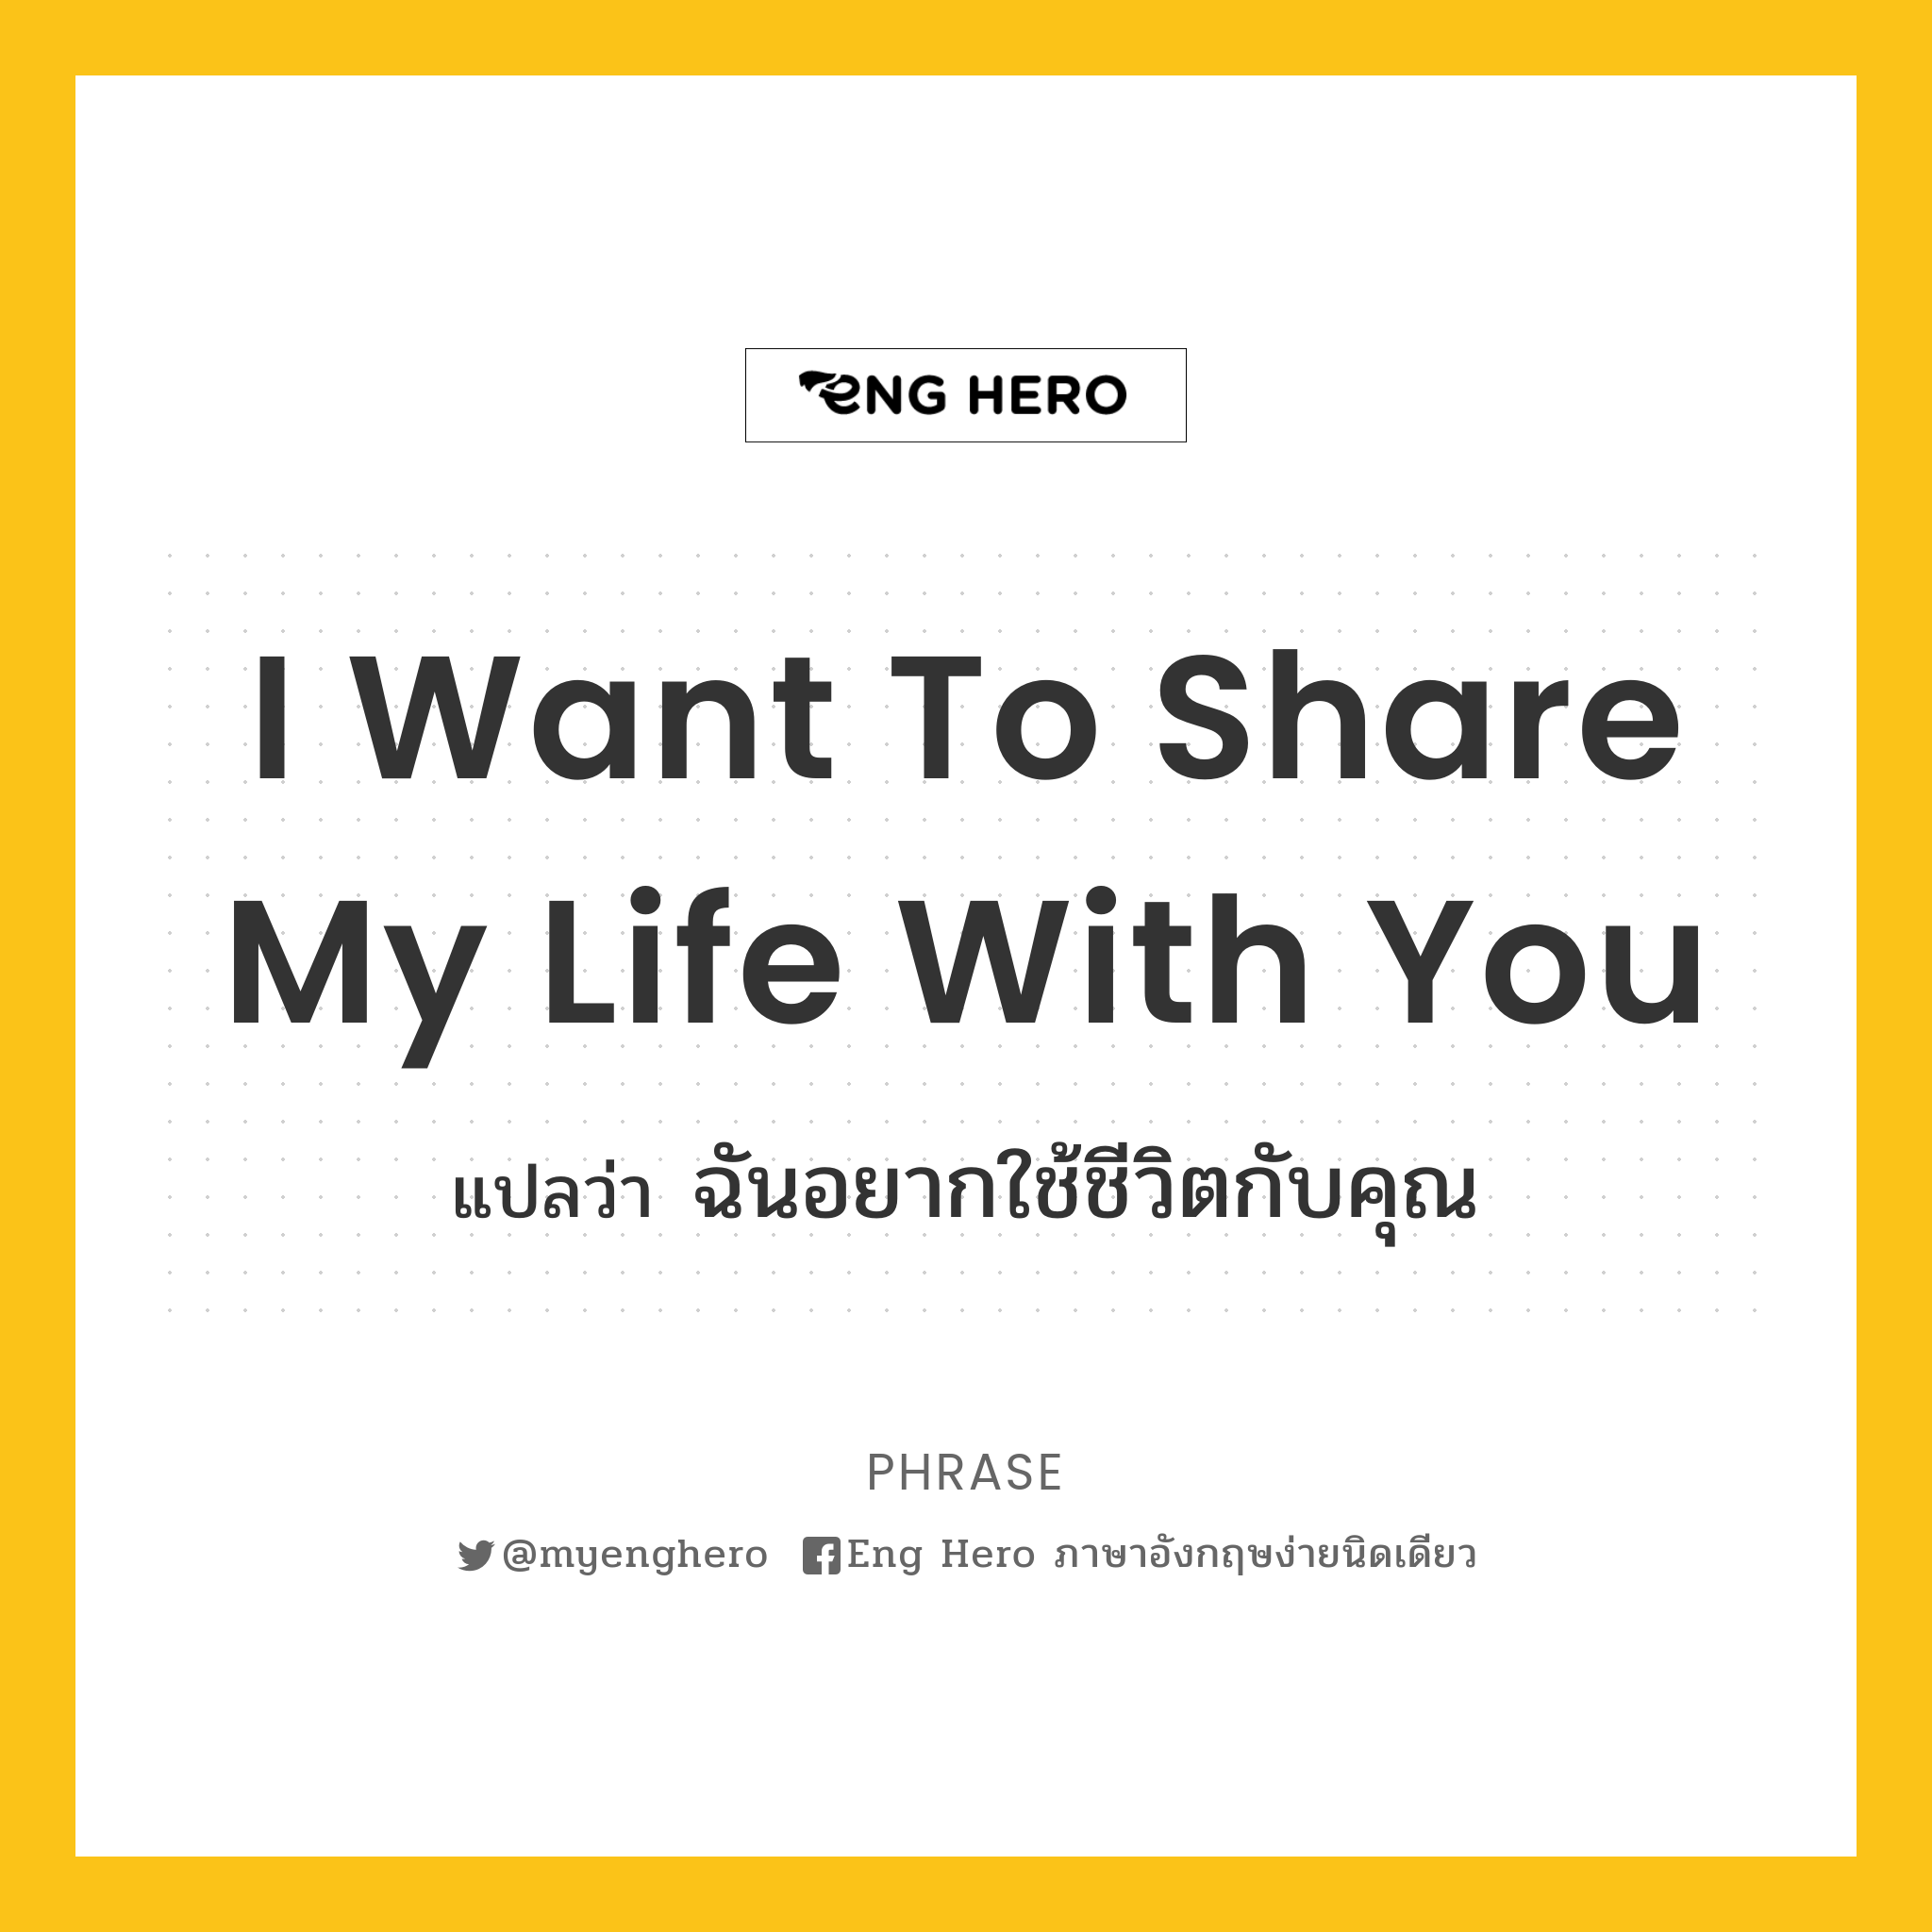 I want to share my life with you